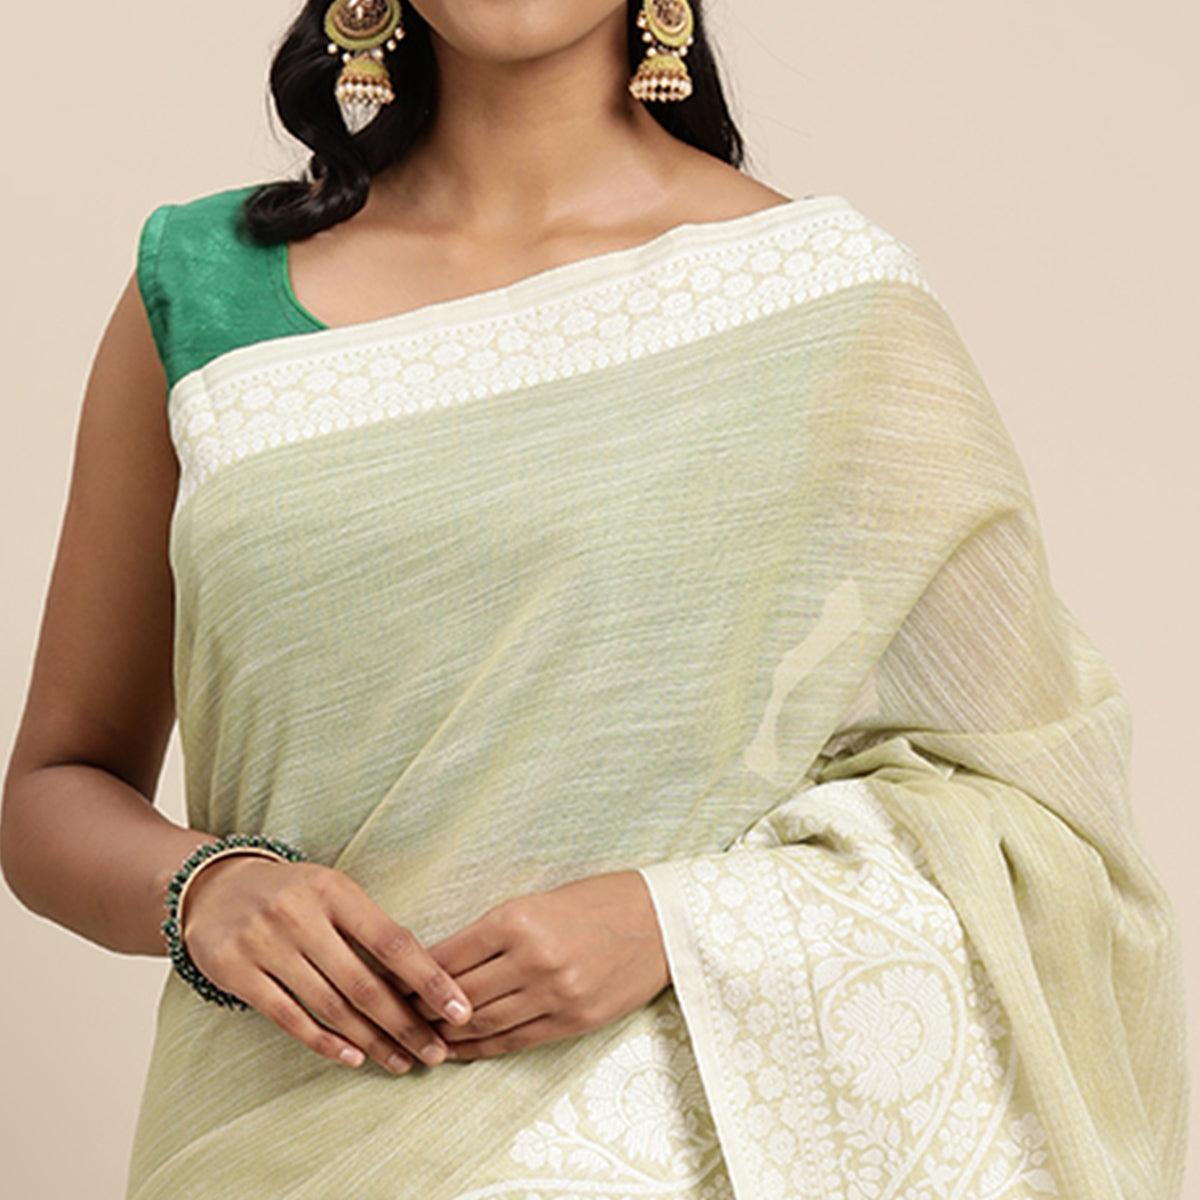 Green Embroidered Linen Saree with Tassels - Peachmode